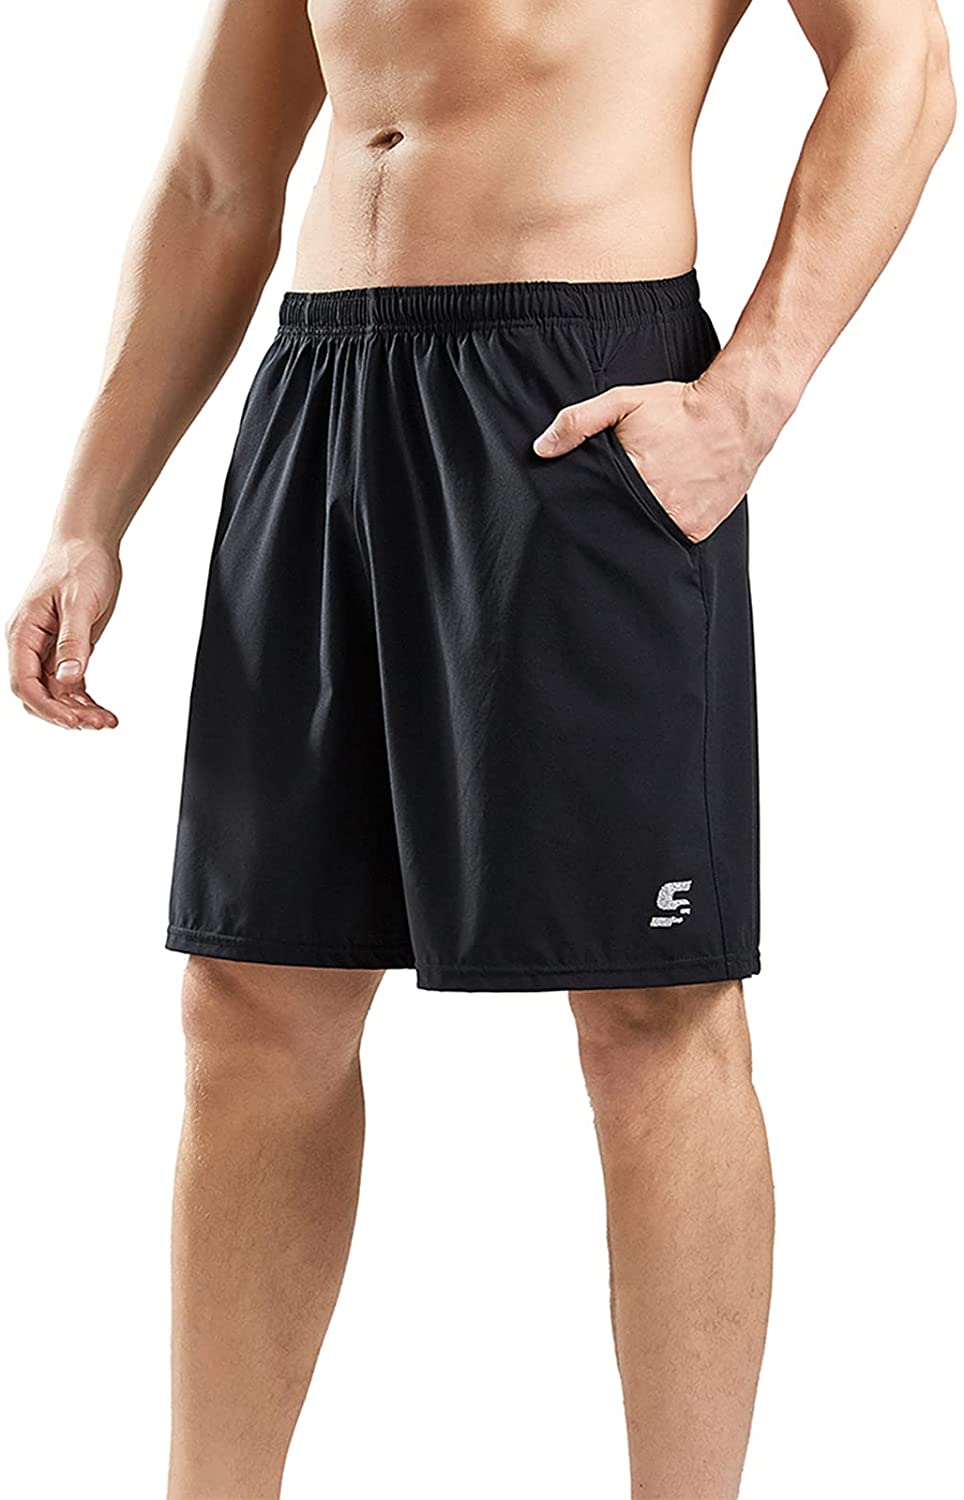 SS COLOR FISH Men Running Shorts with Pockets,Sports Shorts for Men Workout Gym Athletic Basketball Shorts for Men 